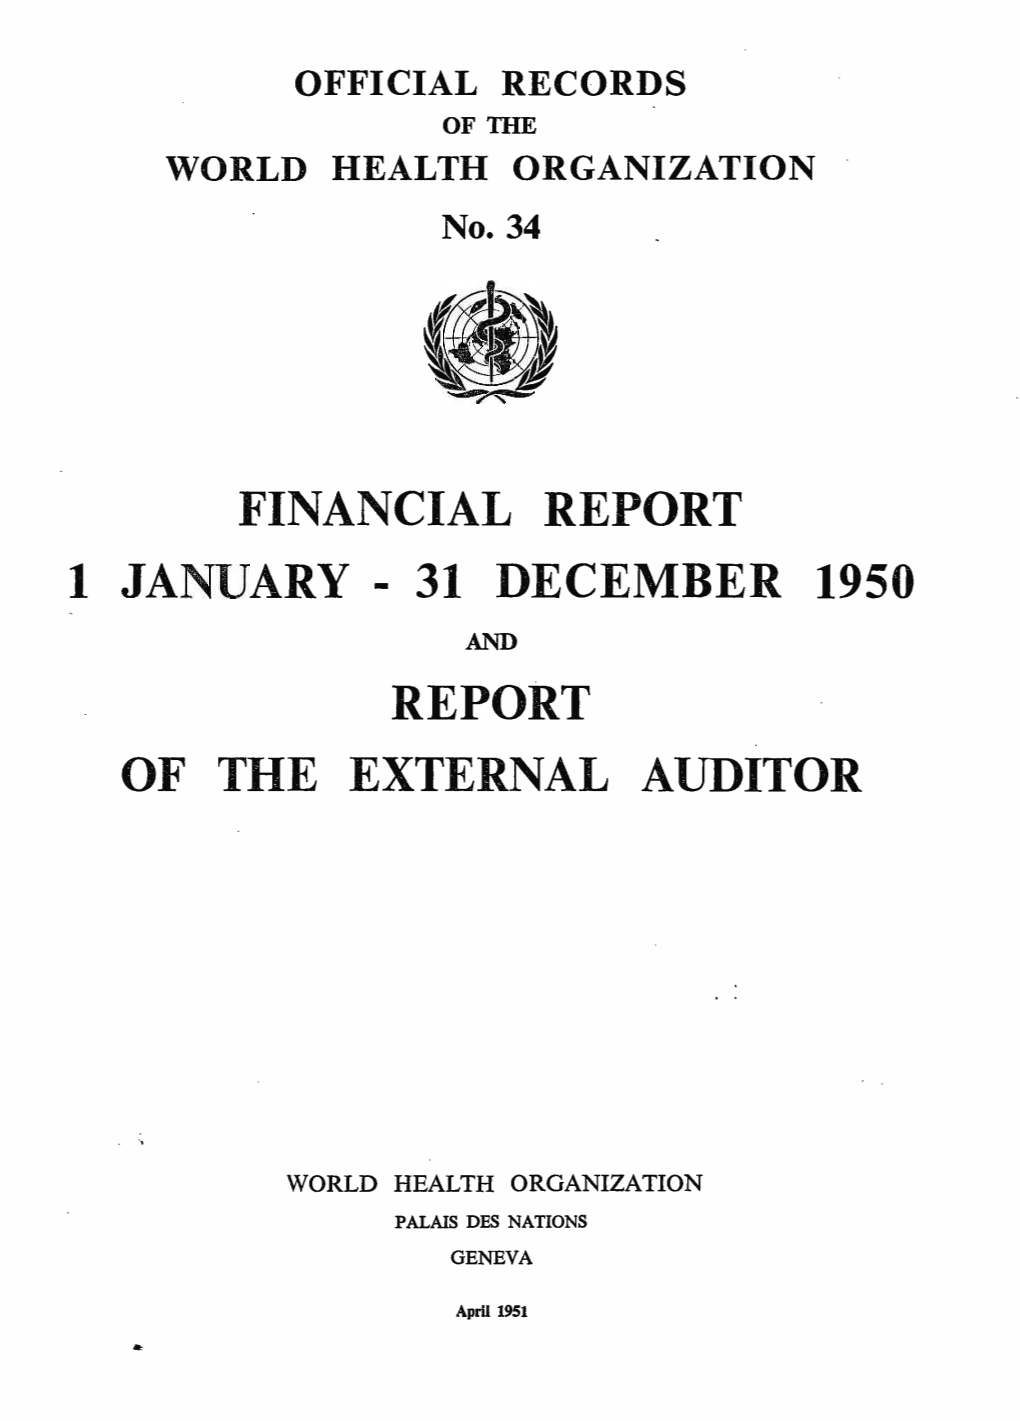 31 December 1950 and Report of the External Auditor